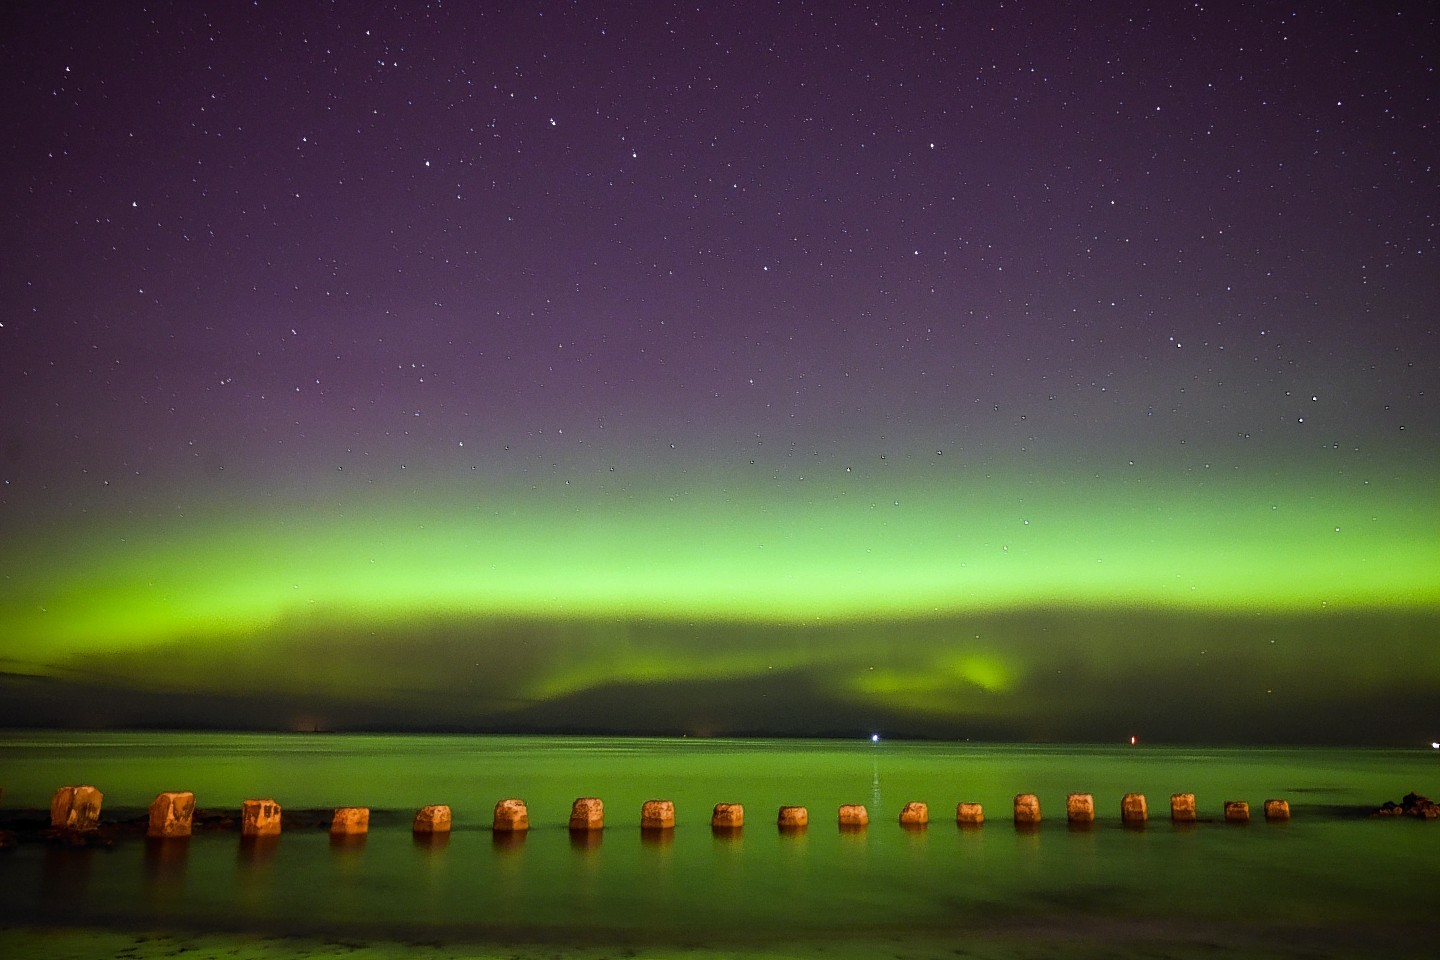 The Aurora Borealis, also known as the Northern Lights, are seen lighting up the sea by the West Beach in Lossiemouth, Moray